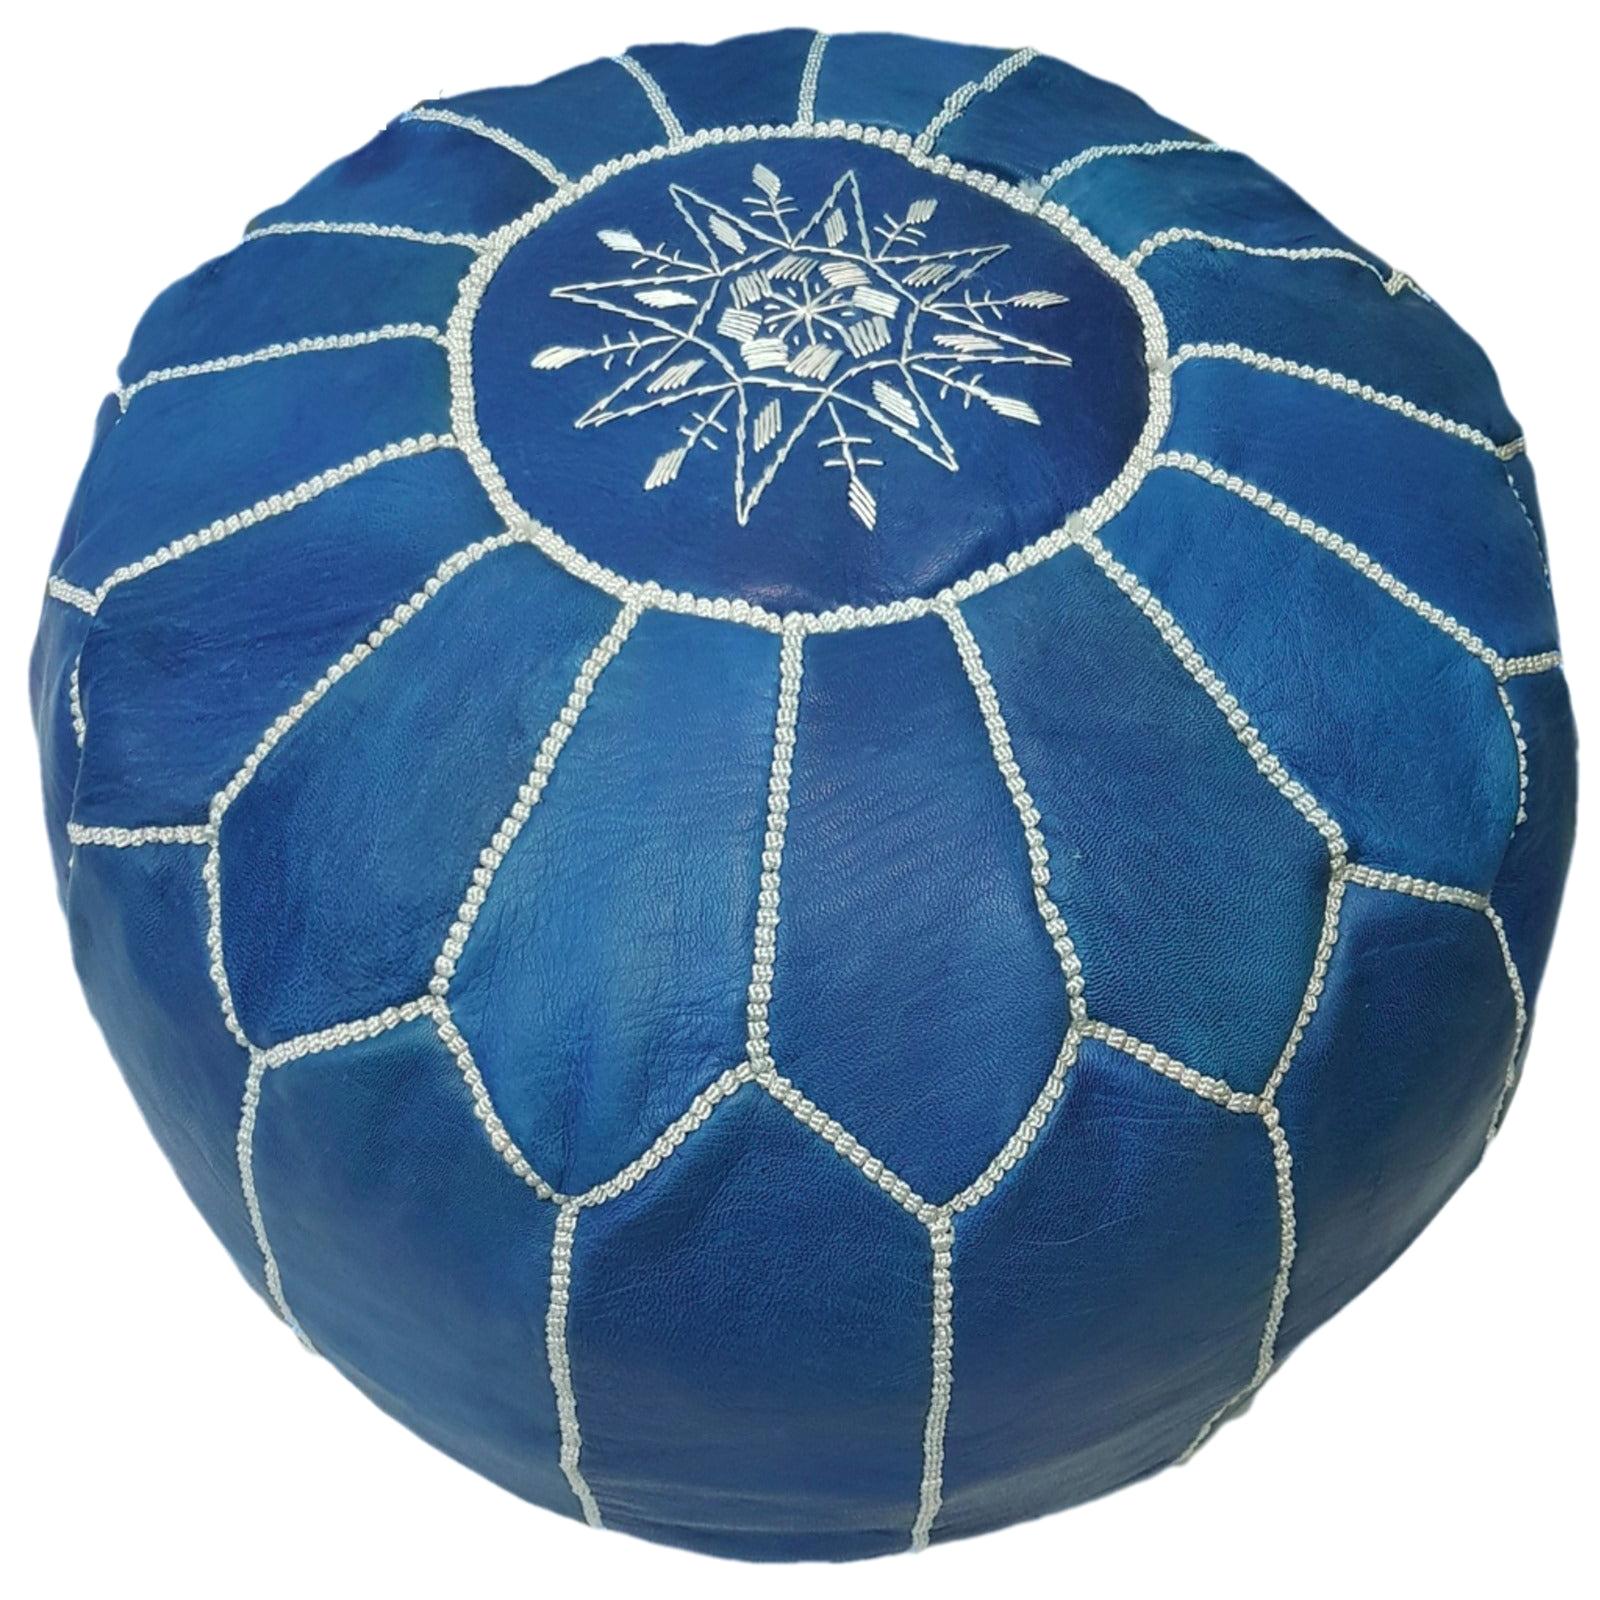 Moroccan Blue Denim pouf ottoman Round embroidery with White Stitching Blue jean 